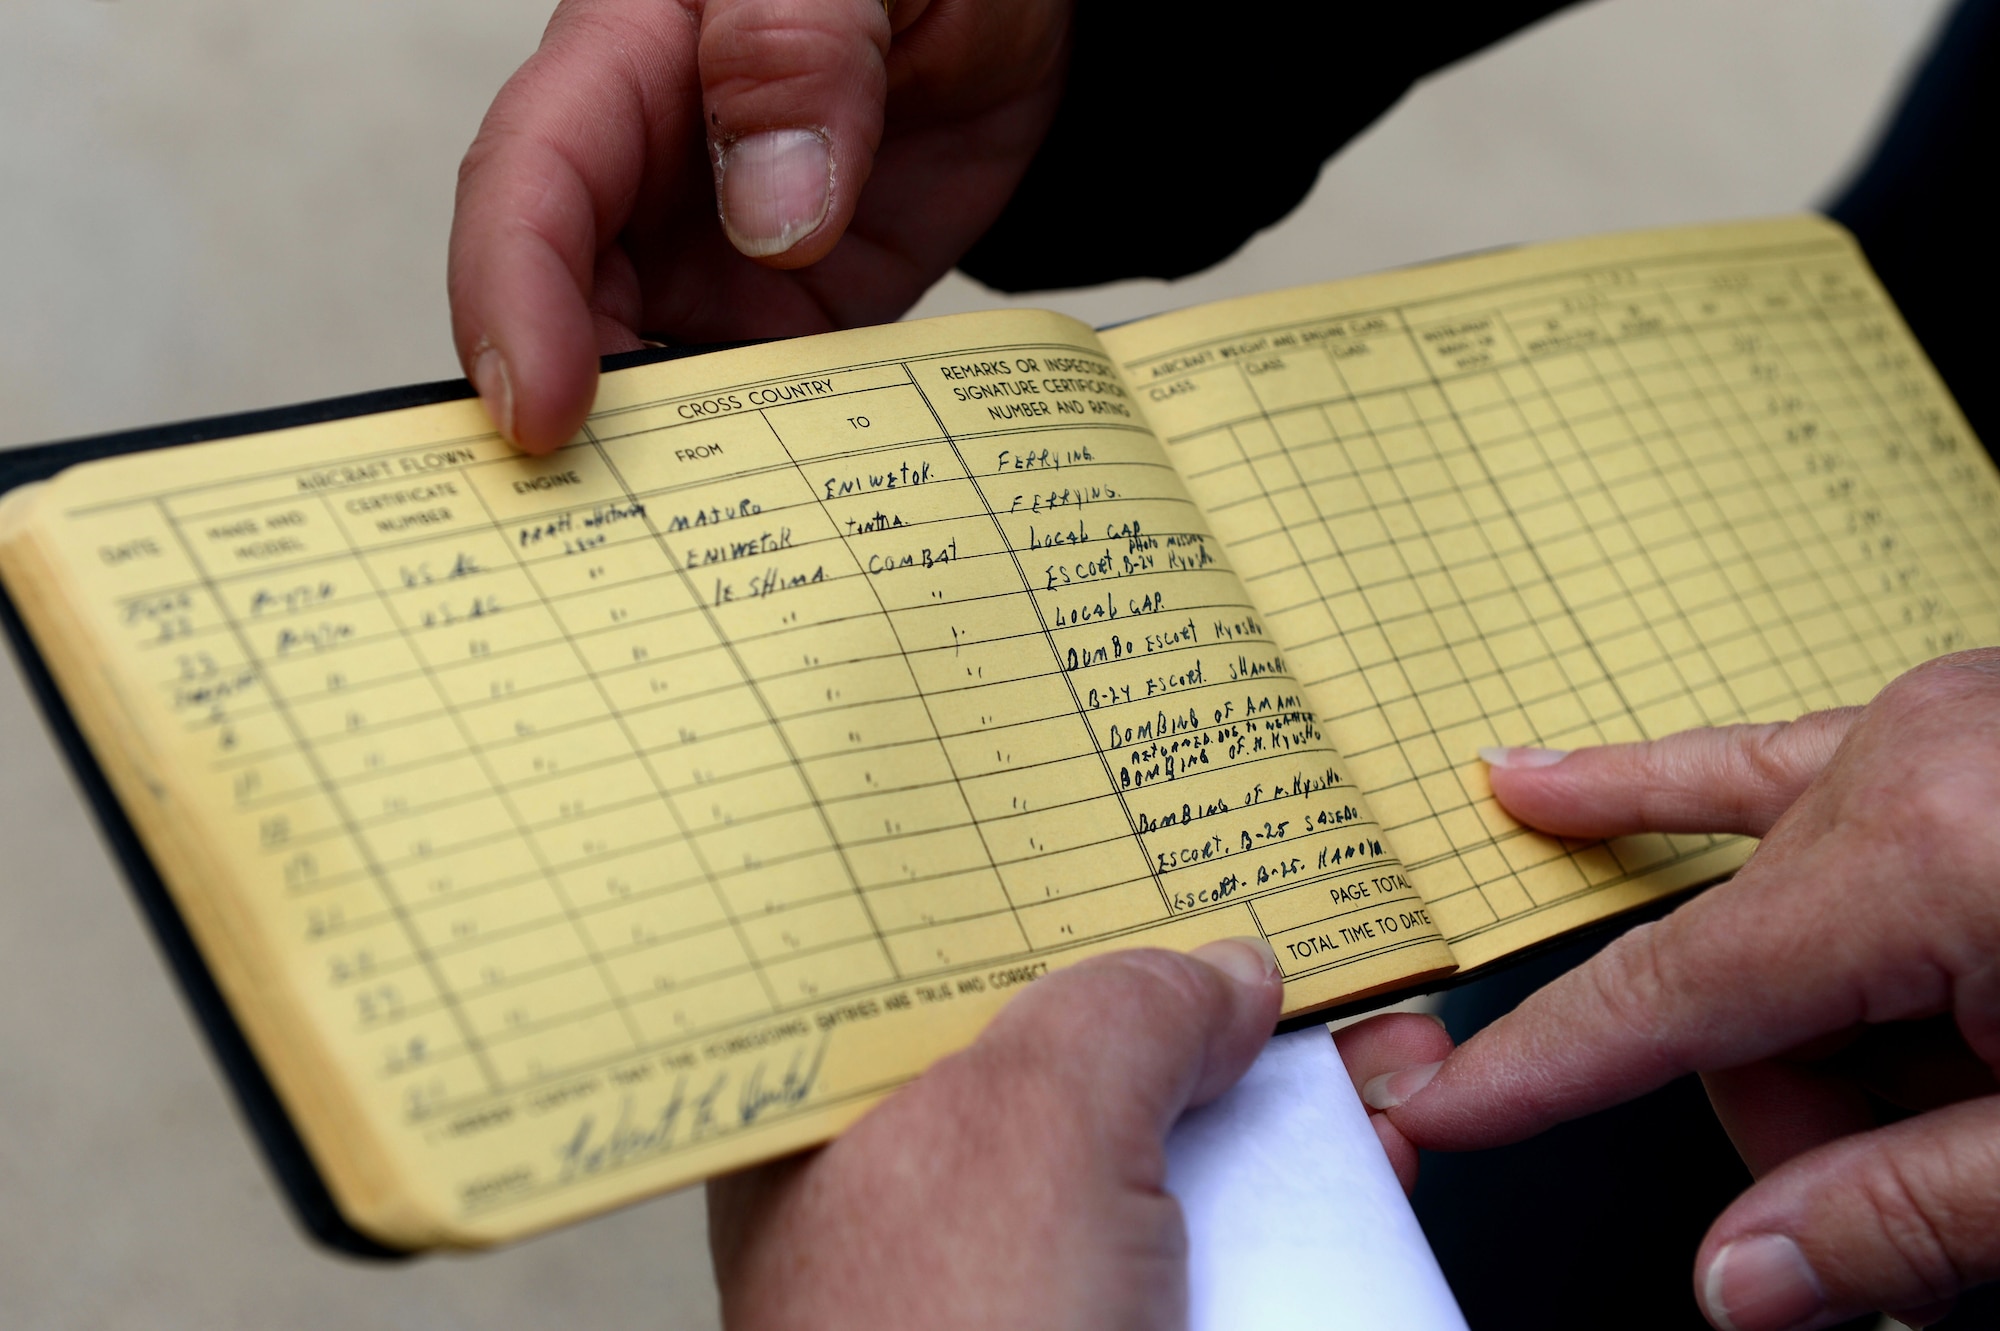 The log book of retired Air National Guard Chief Warrant Officer 2 Robert Hertel is looked at during the Heritage Flight Training and Certification Course Feb. 28, 2015, at Davis-Monthan Air Force Base, Ariz. The book showed the 92-year-old veteran's, flights over Iwo Jima, Japan during World War II. (U.S. Air Force photo/Senior Airman Jensen Stidham)